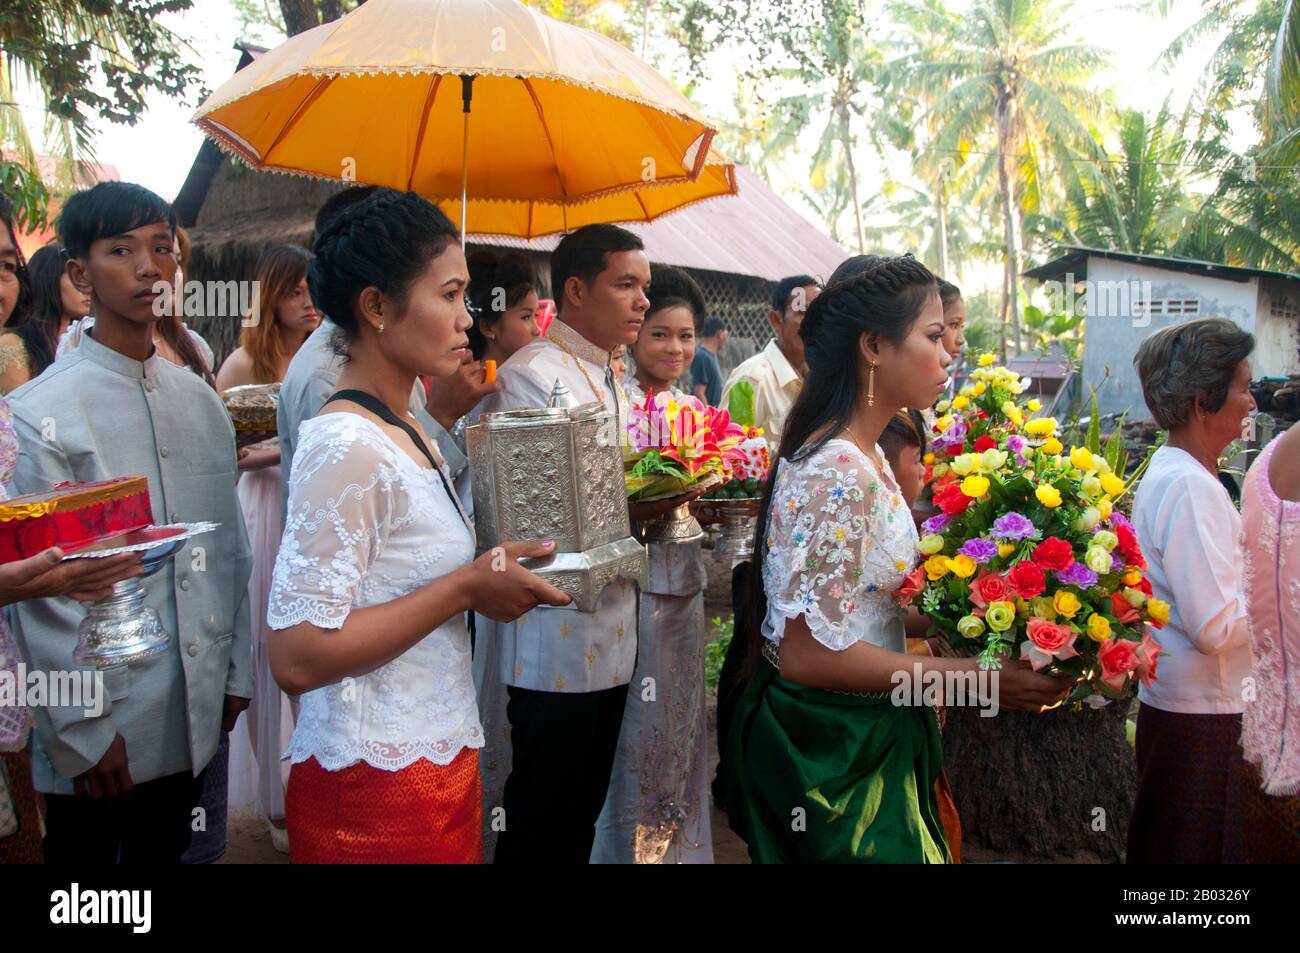 The traditional Khmer wedding is a long and colorful affair. Formerly it lasted three days, but since the 1980s it has more commonly lasted a day and a half.  The ceremony begins in the morning at the home of the bride and is directed by the achar (a specialist in ritual who acts as a master of ceremonies). Buddhist priests offer a short sermon and recite prayers of blessing. Parts of the ceremony involve ritual hair cutting and tying cotton threads soaked in holy water around the couple's wrists. Stock Photo